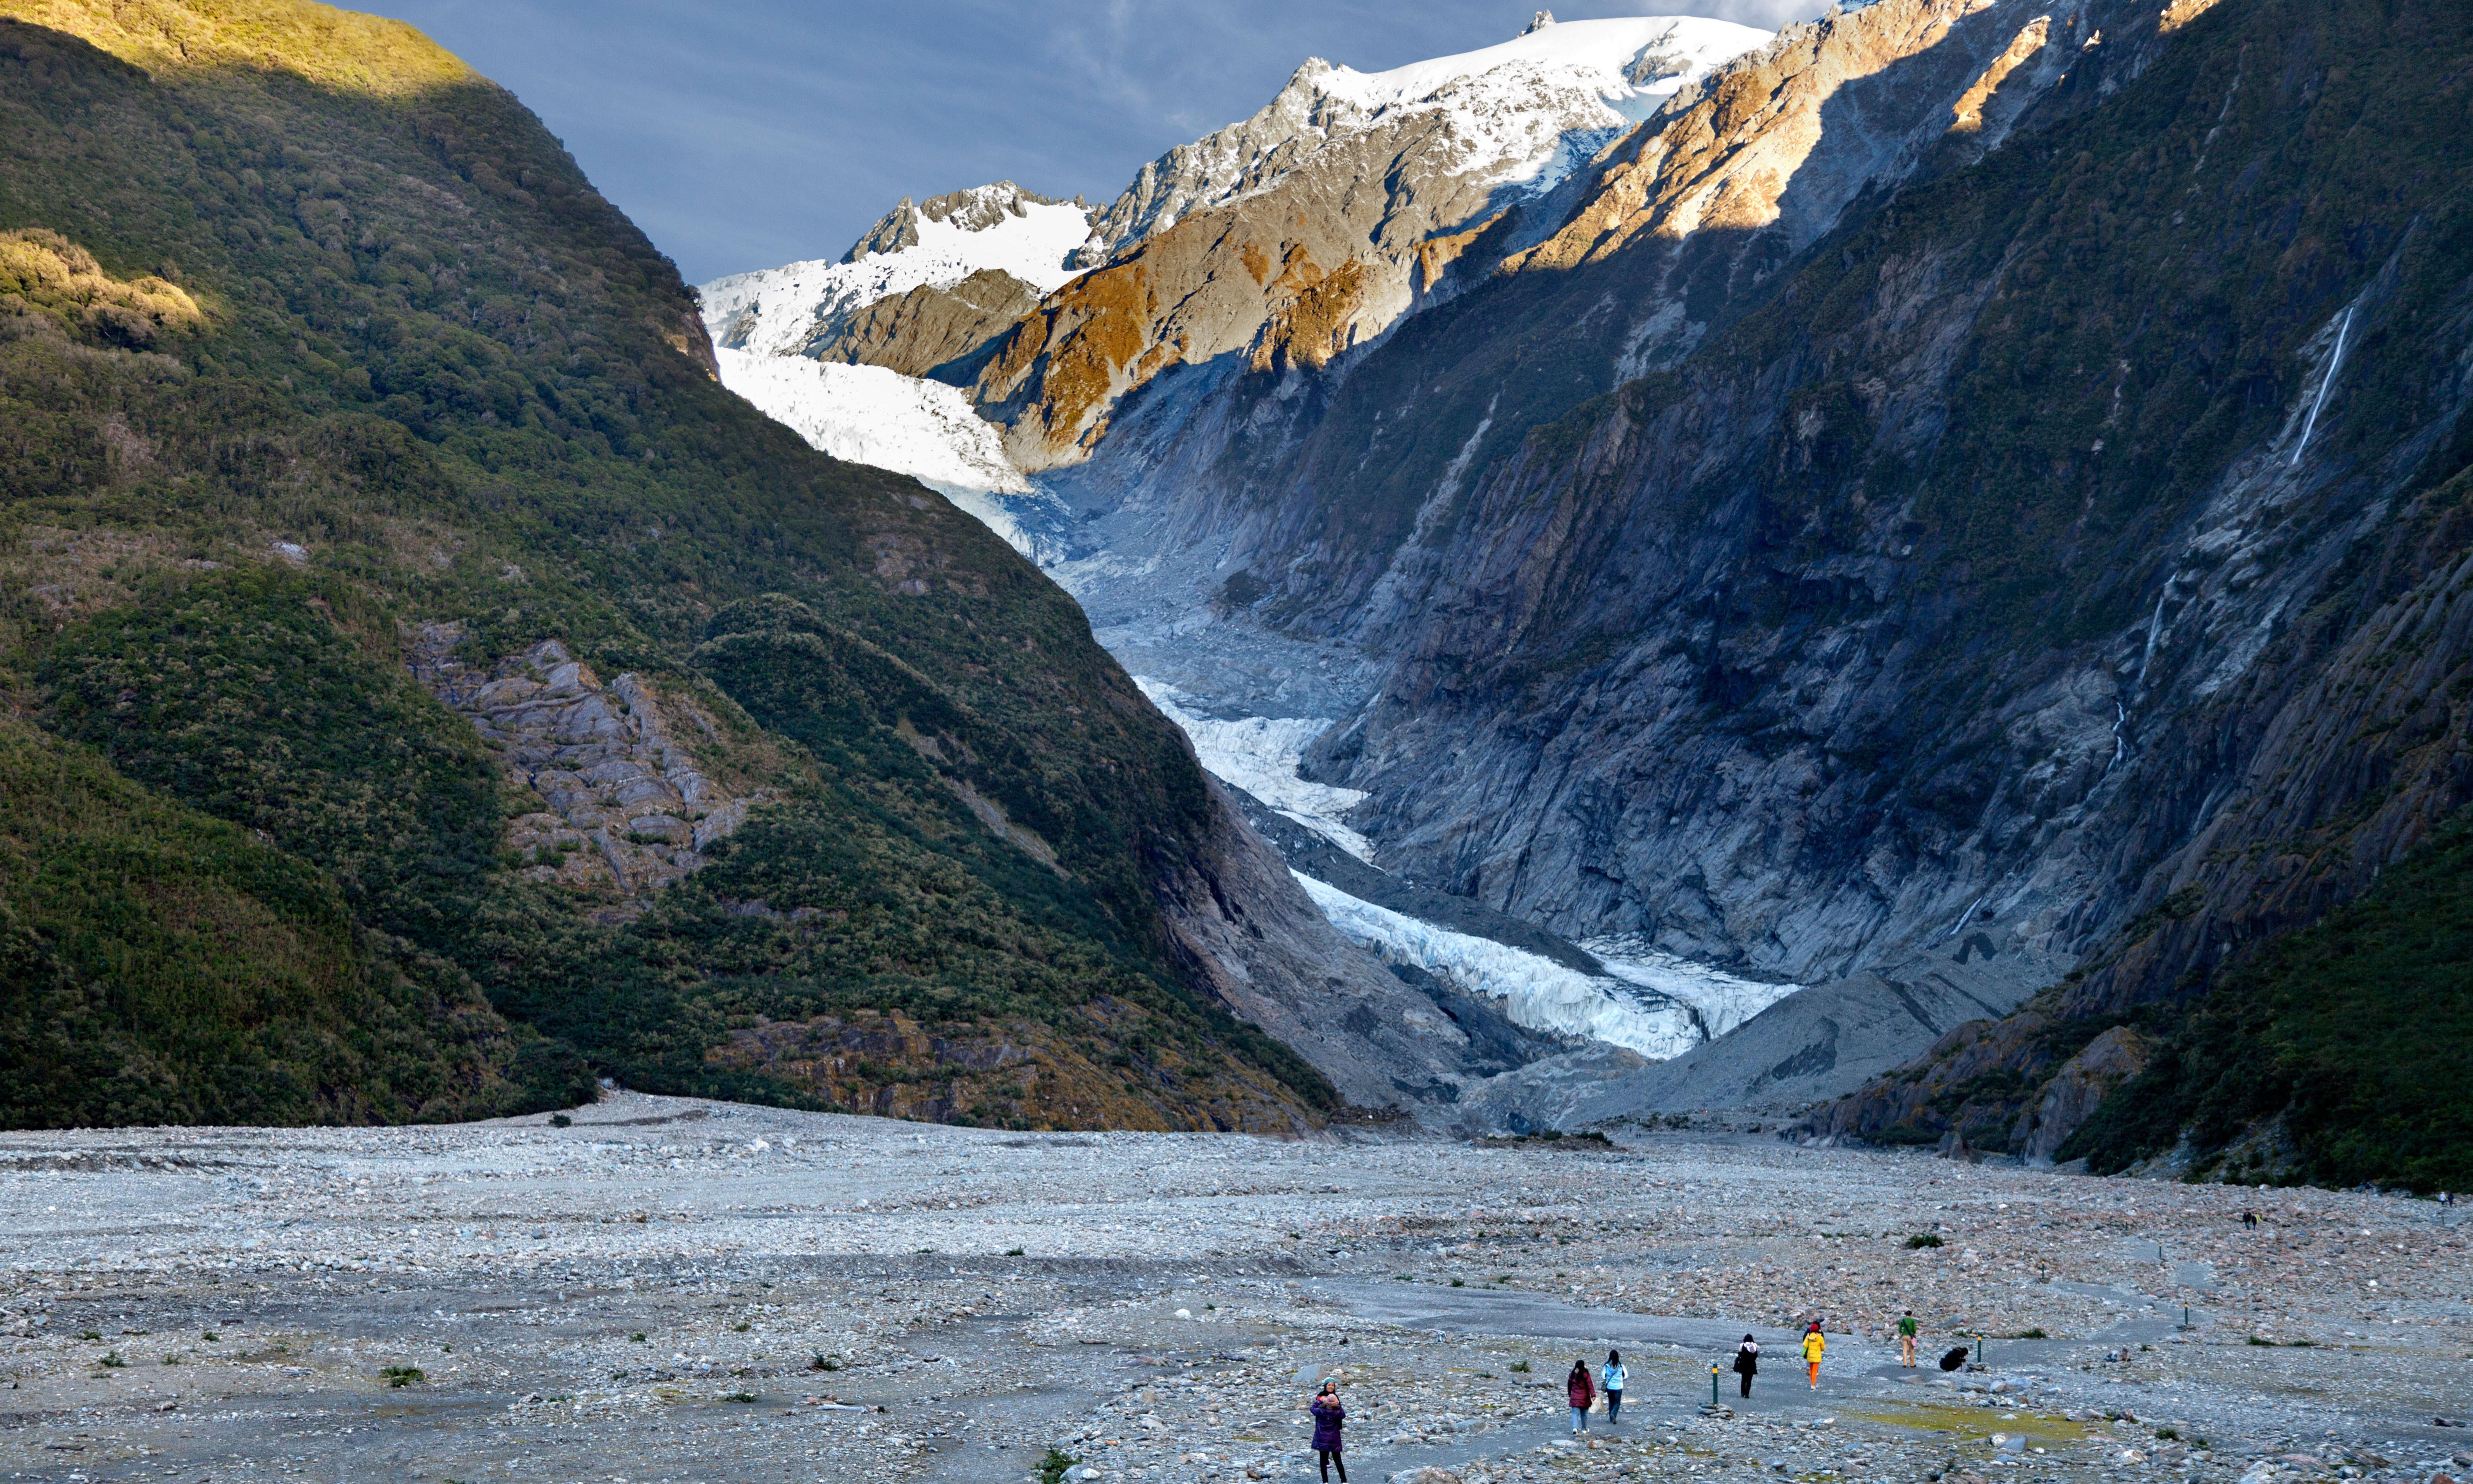 Many of New Zealand’s glaciers could disappear in a decade, scientists warn